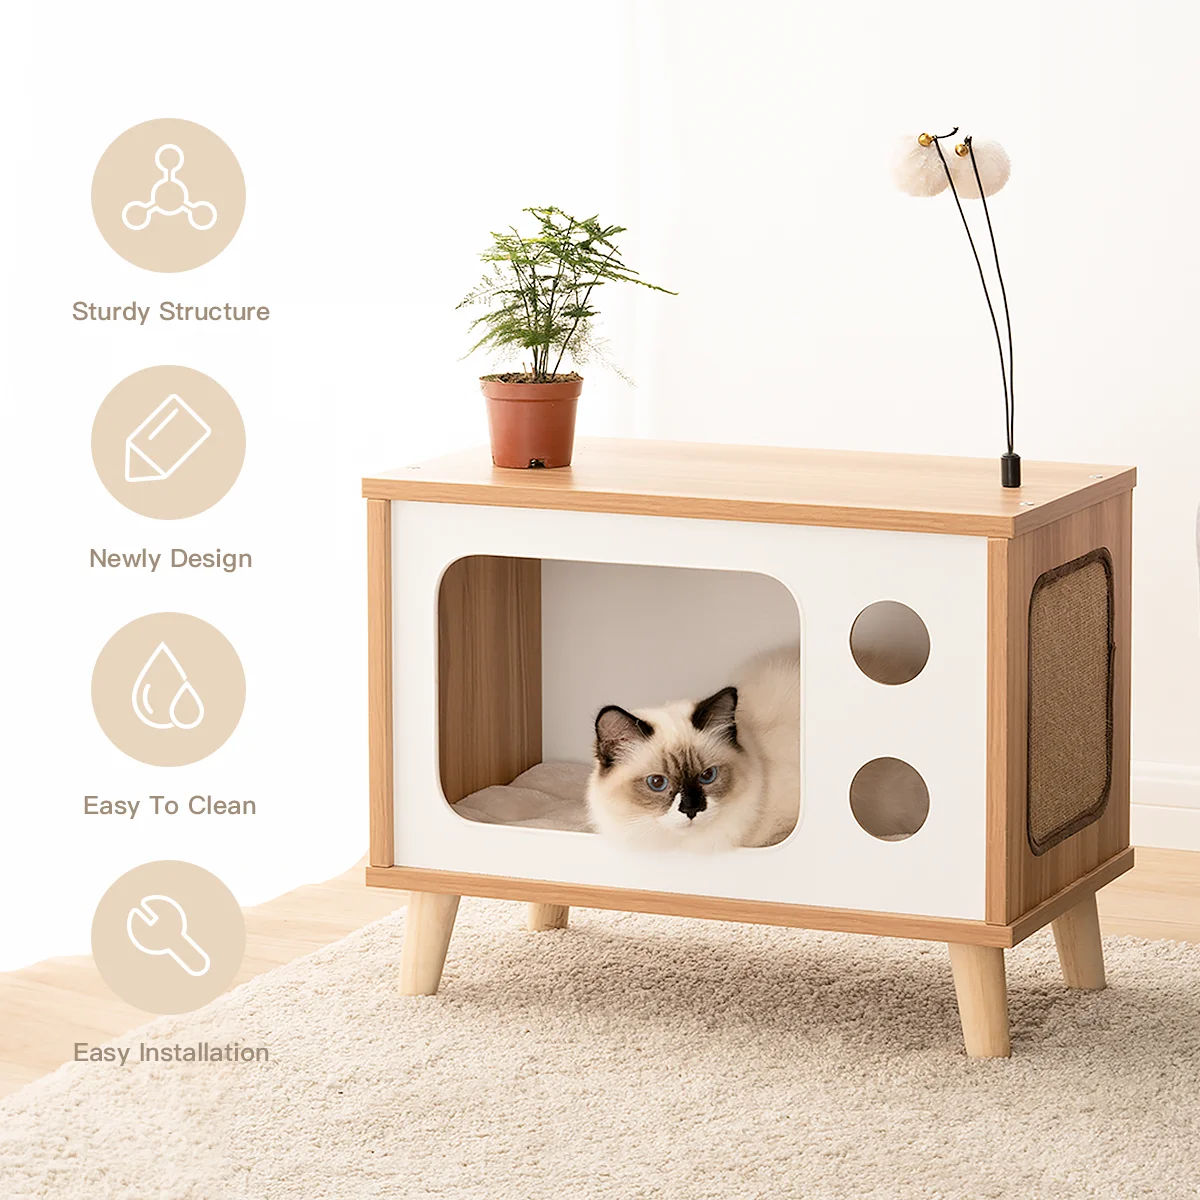 Mewoofun Cat House Wooden Condo Bed Indoor TV-Shaped Sturdy Large Luxury Cat Shelter Furniture with Cushion Cat Scratcher US 3